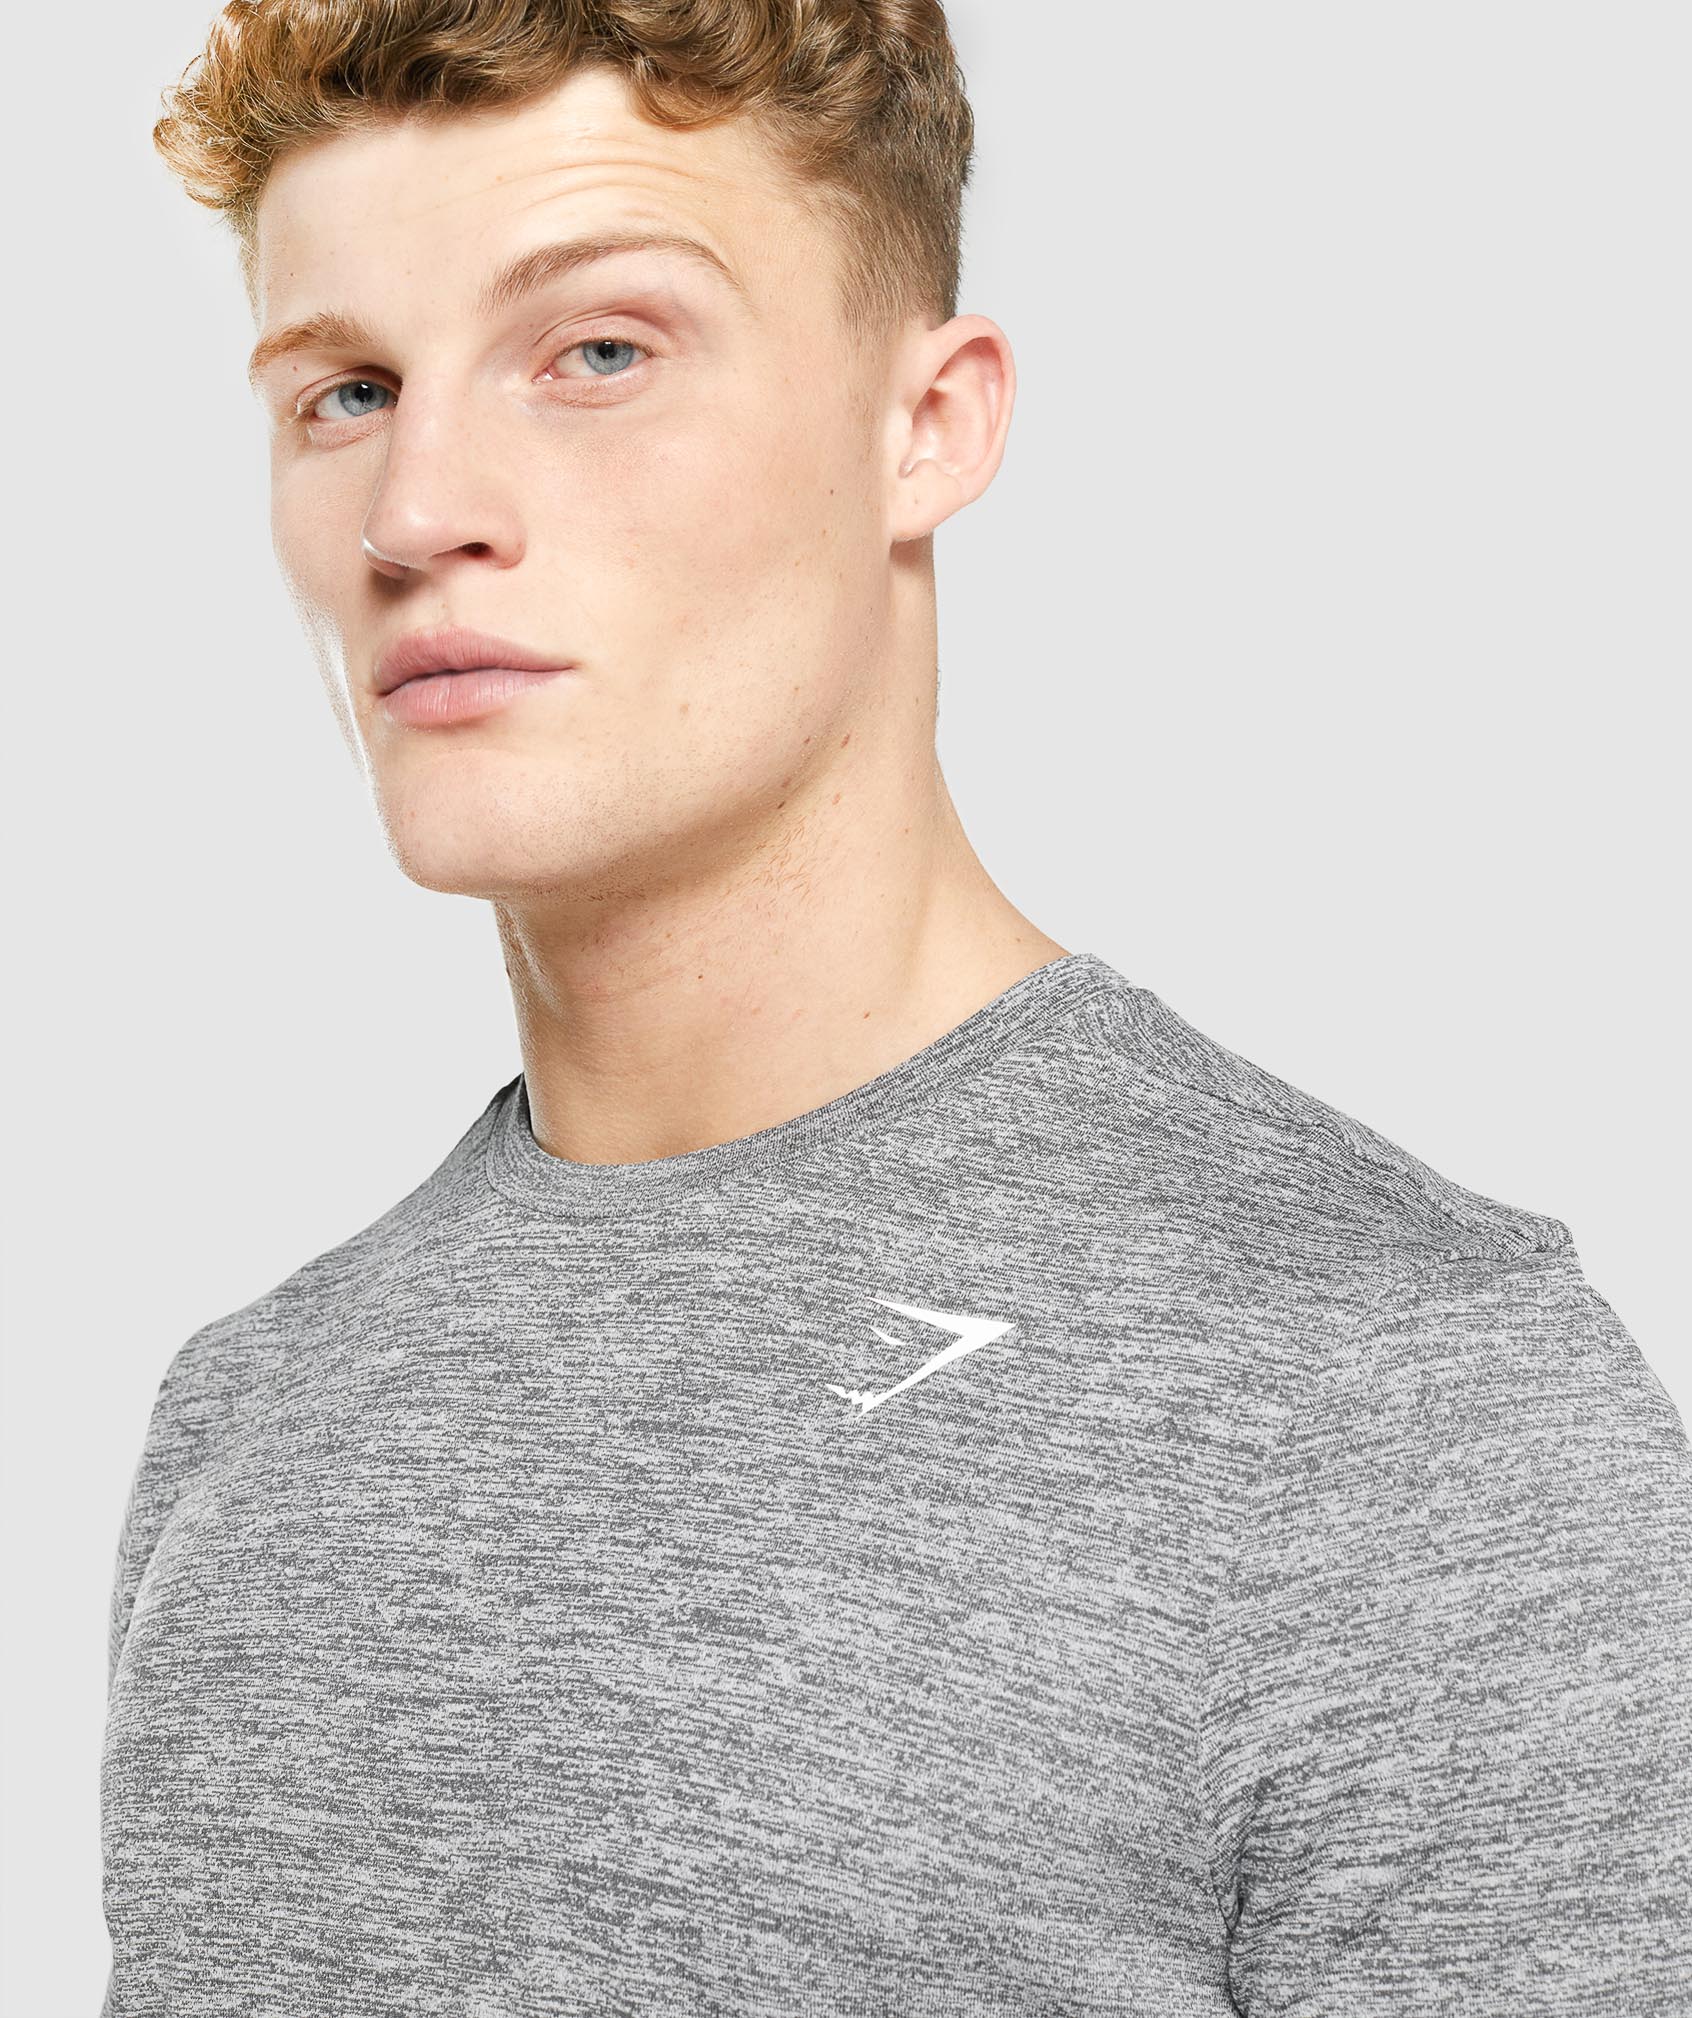 Arrival Marl Long Sleeve T-Shirt in Charcoal Marl - view 5